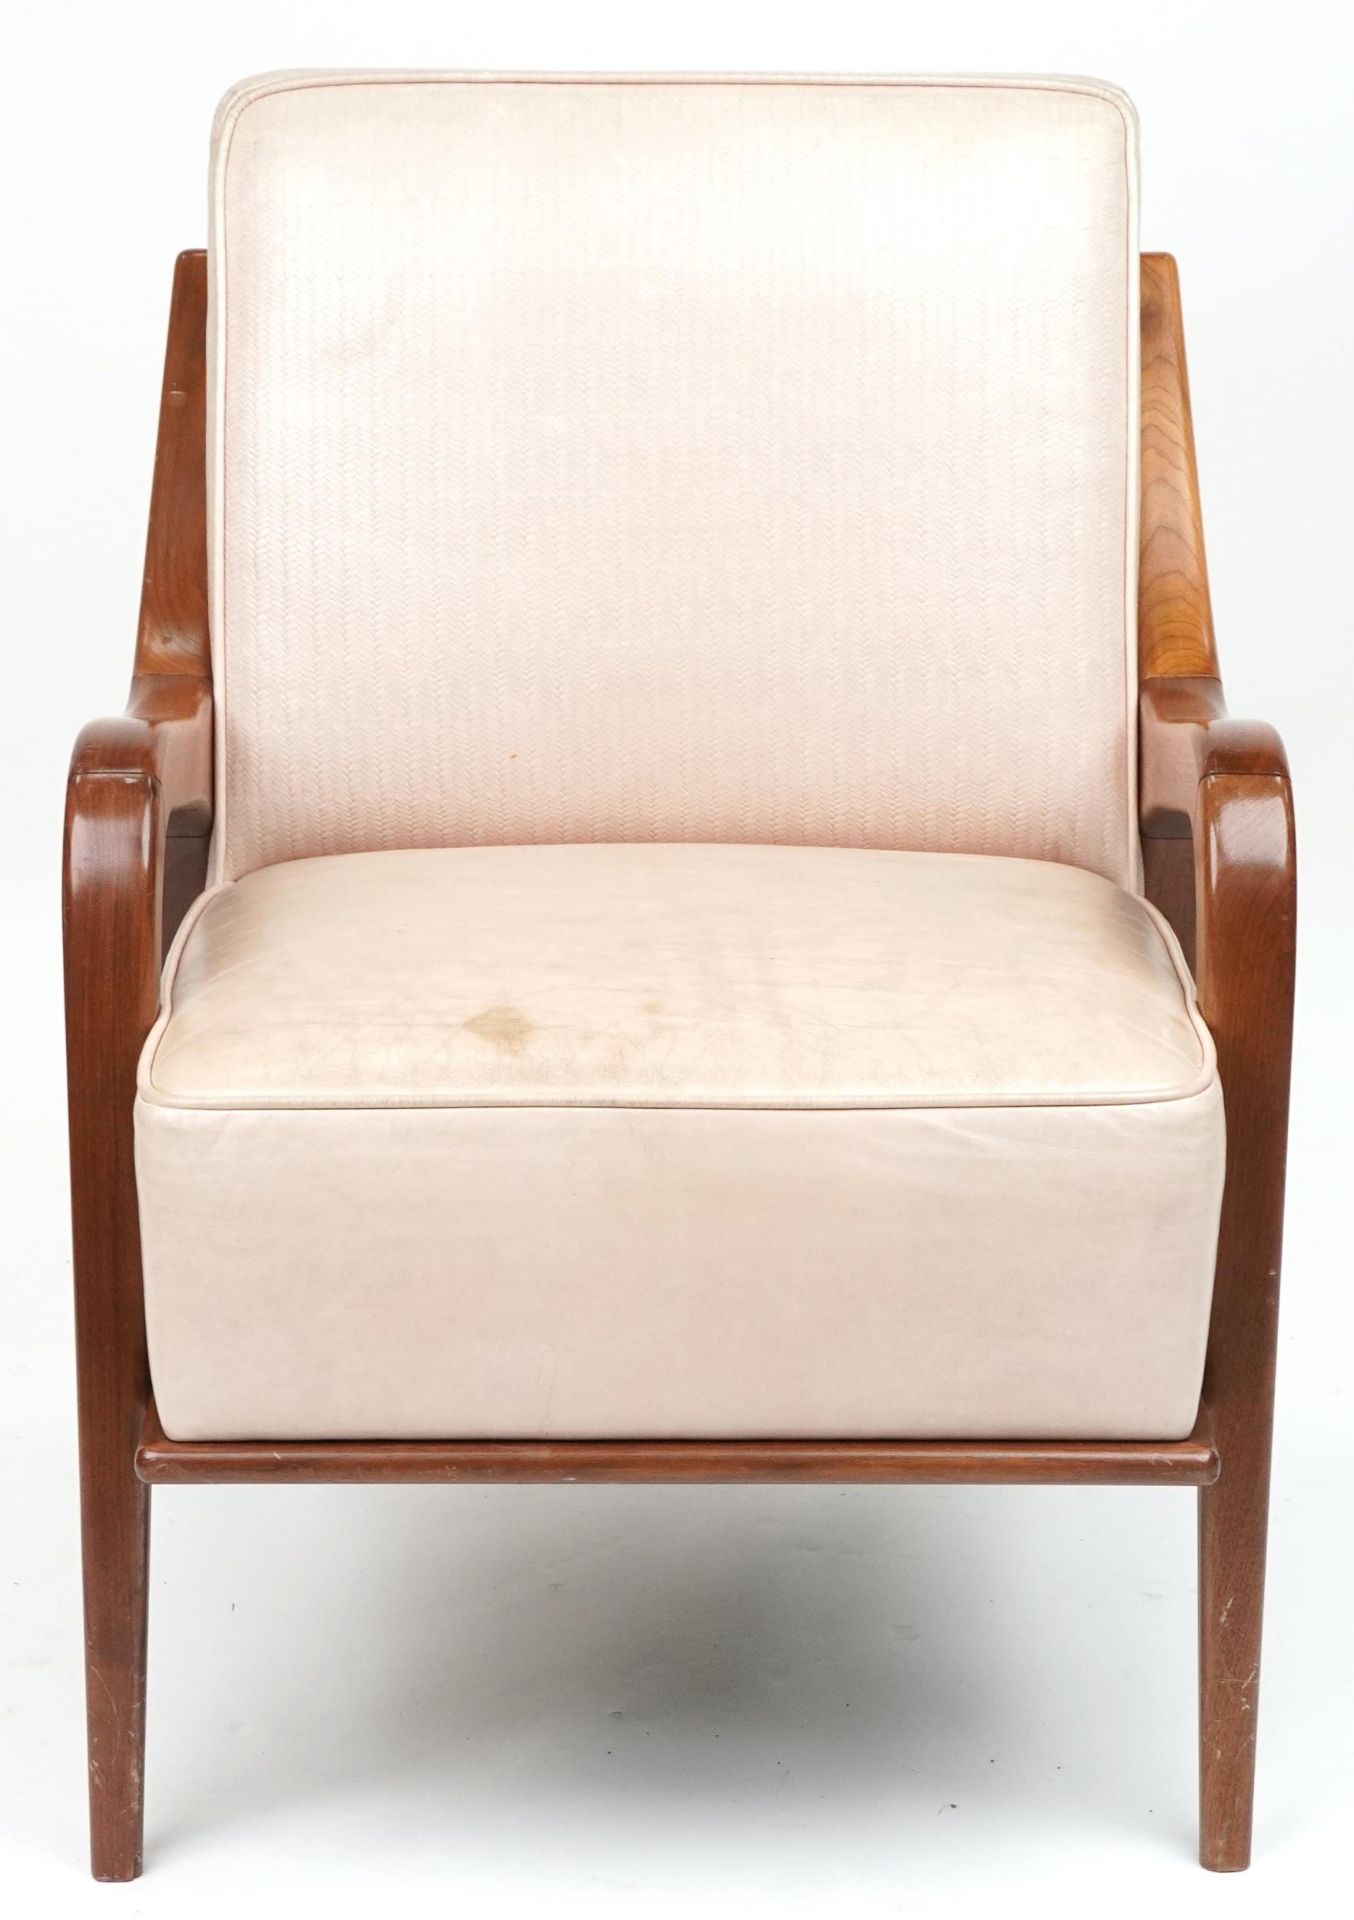 Scandinavian design hardwood lounge chair having a cream upholstered back and seat, 86cm H x 62. - Image 2 of 4